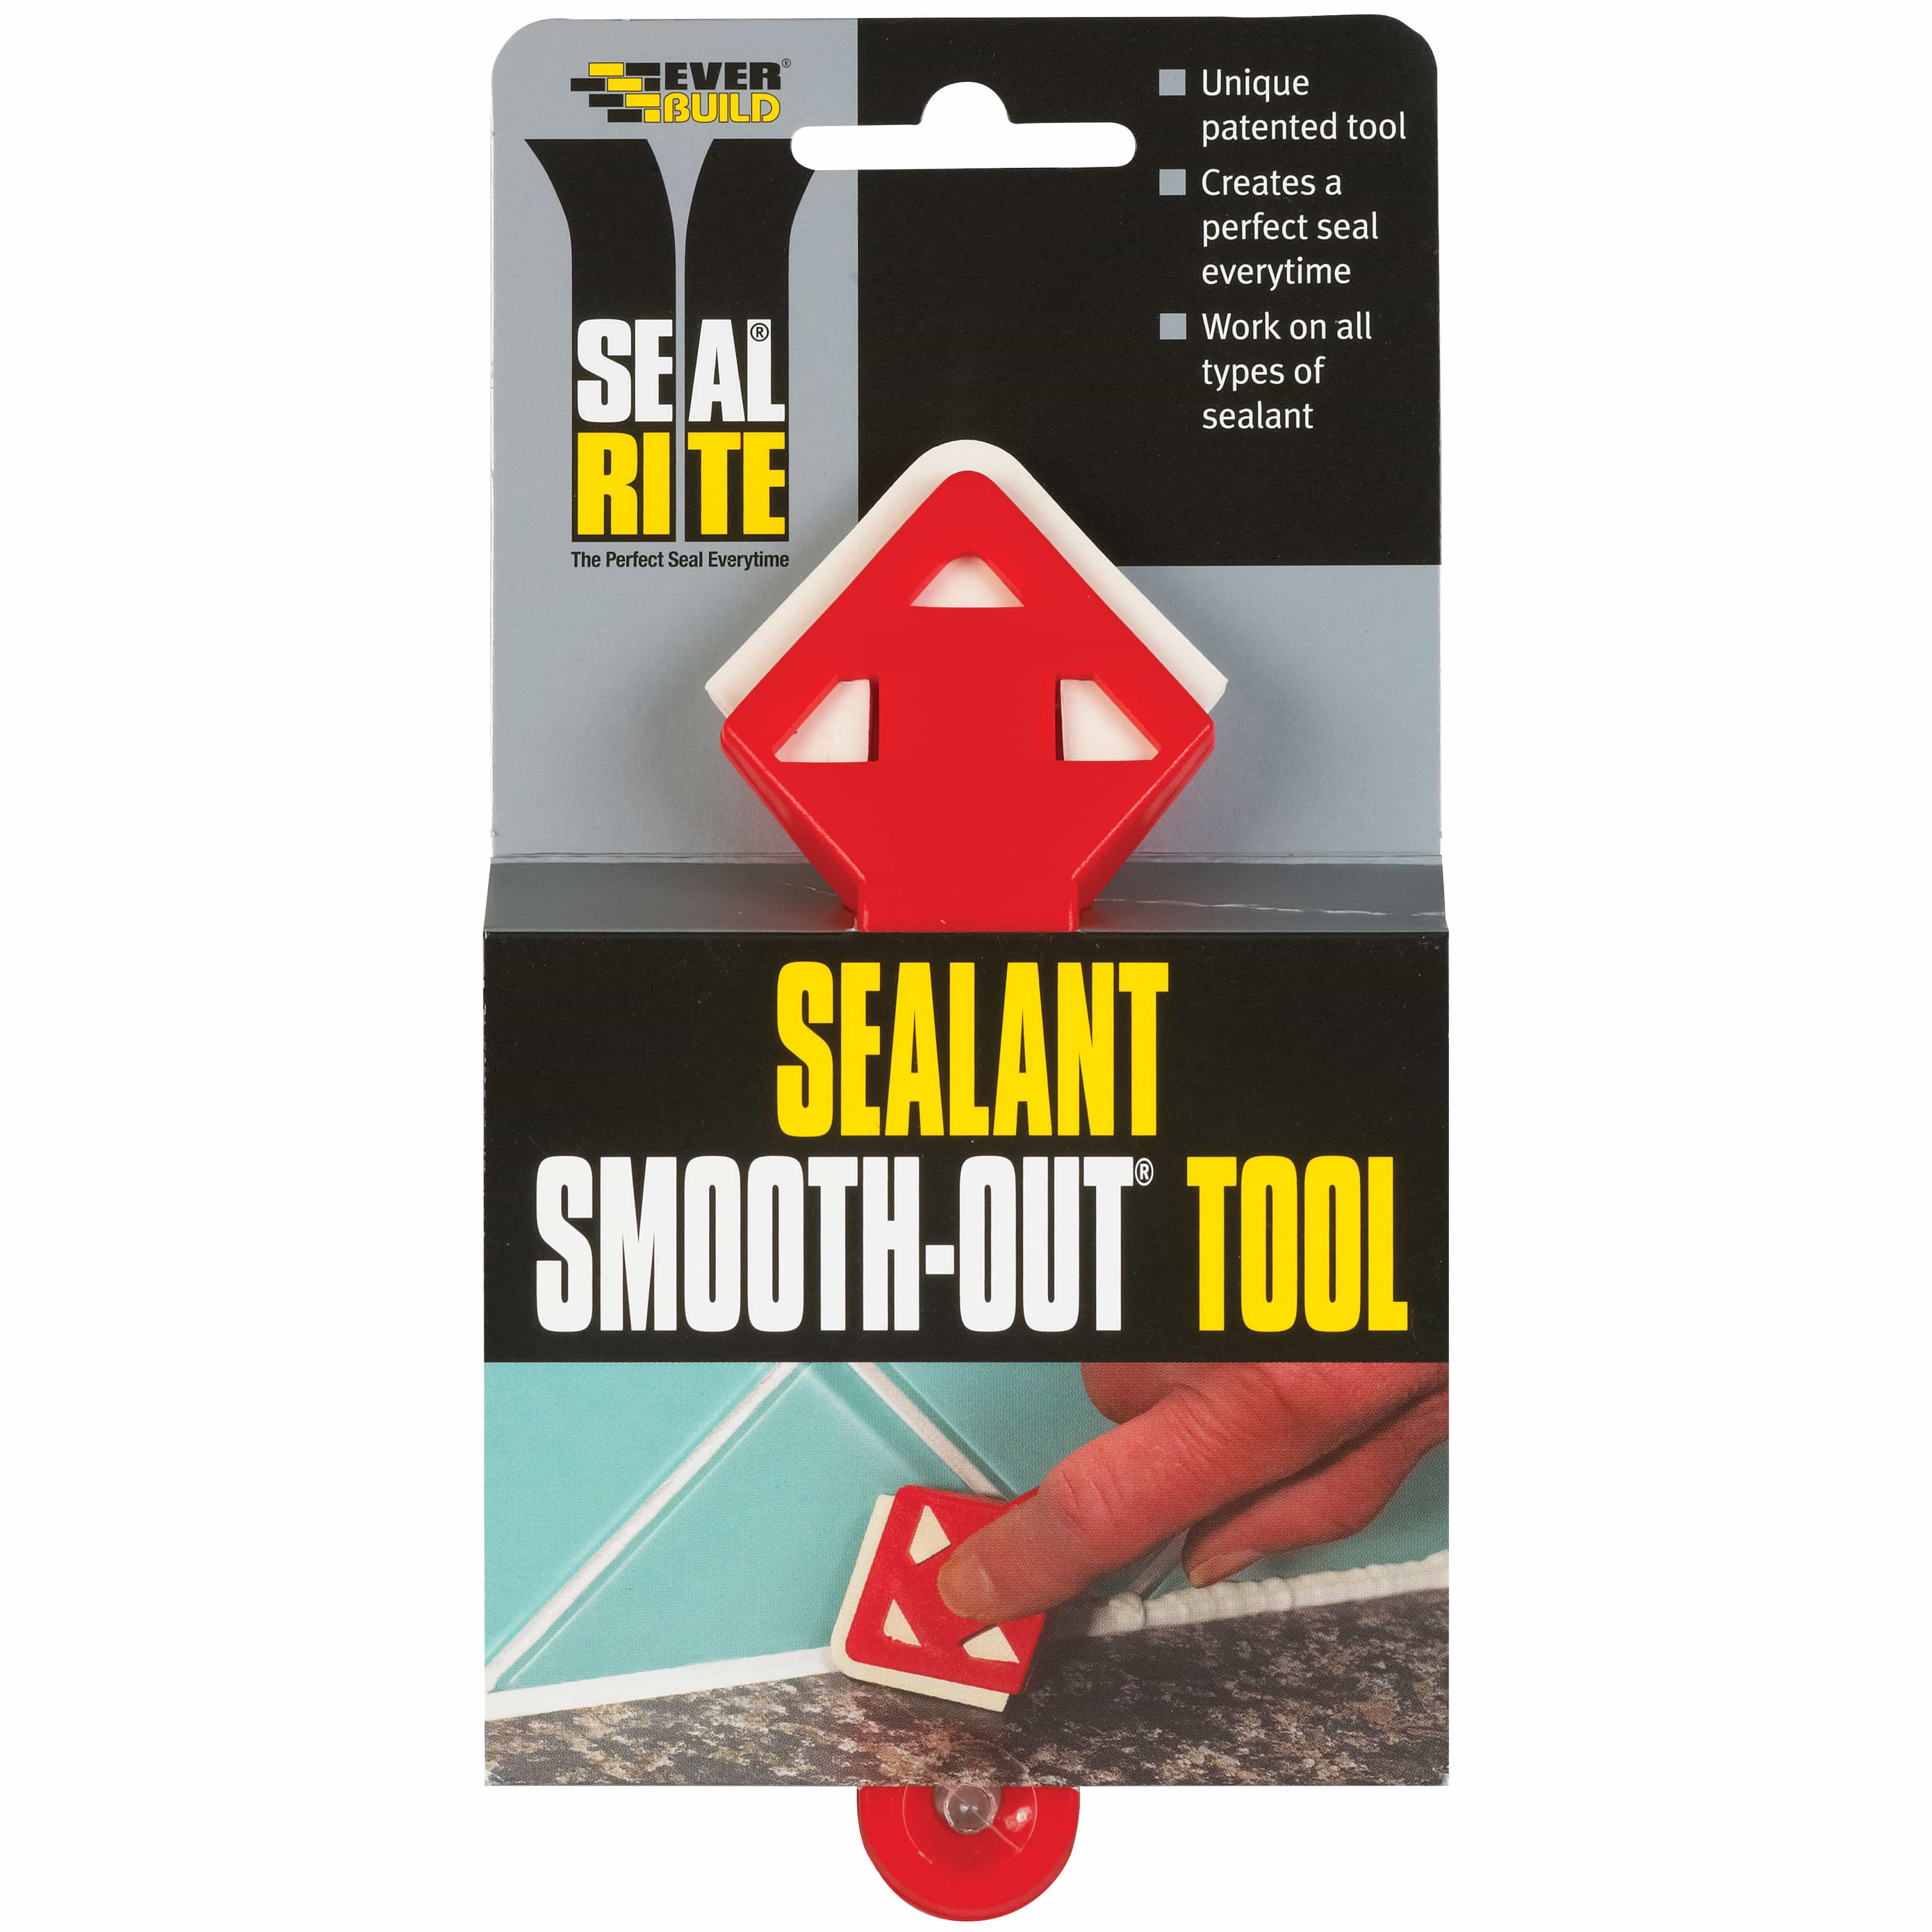 Everbuild seal rite sealant smooth out tool red easy use